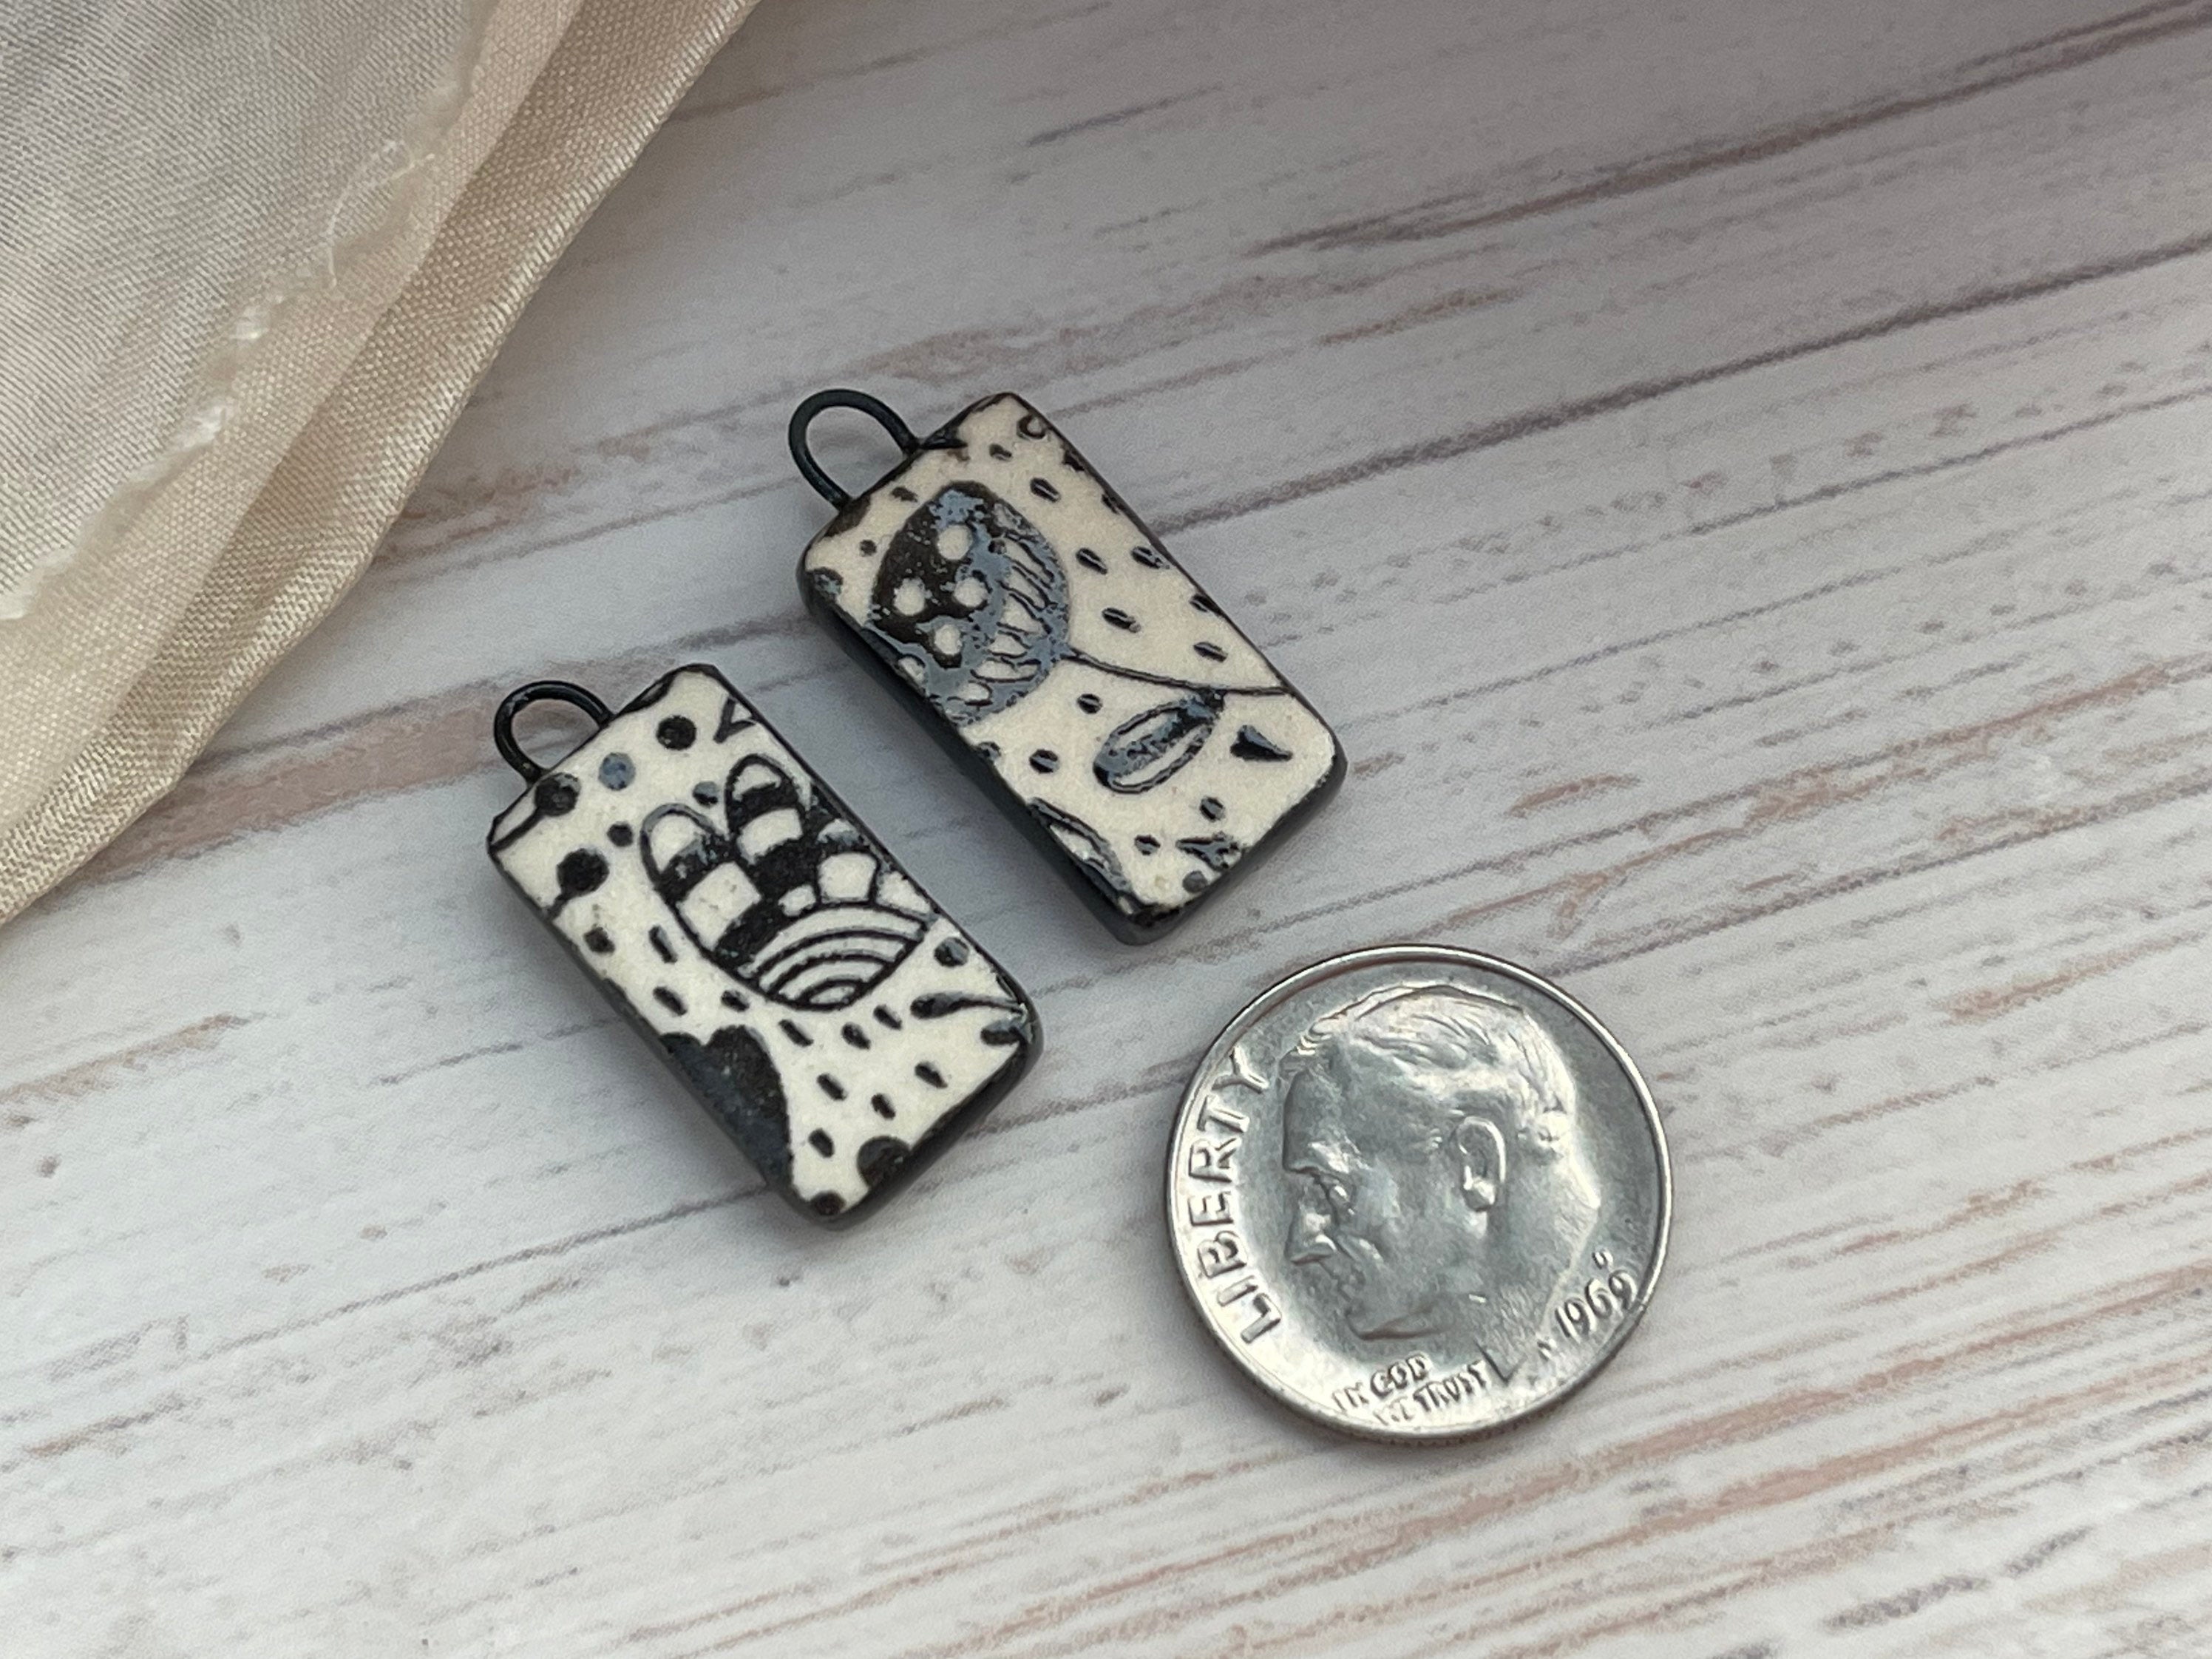 Black Earring Bead Pair, Porcelain Ceramic Charms, Jewelry Making Components, Beading Handmade